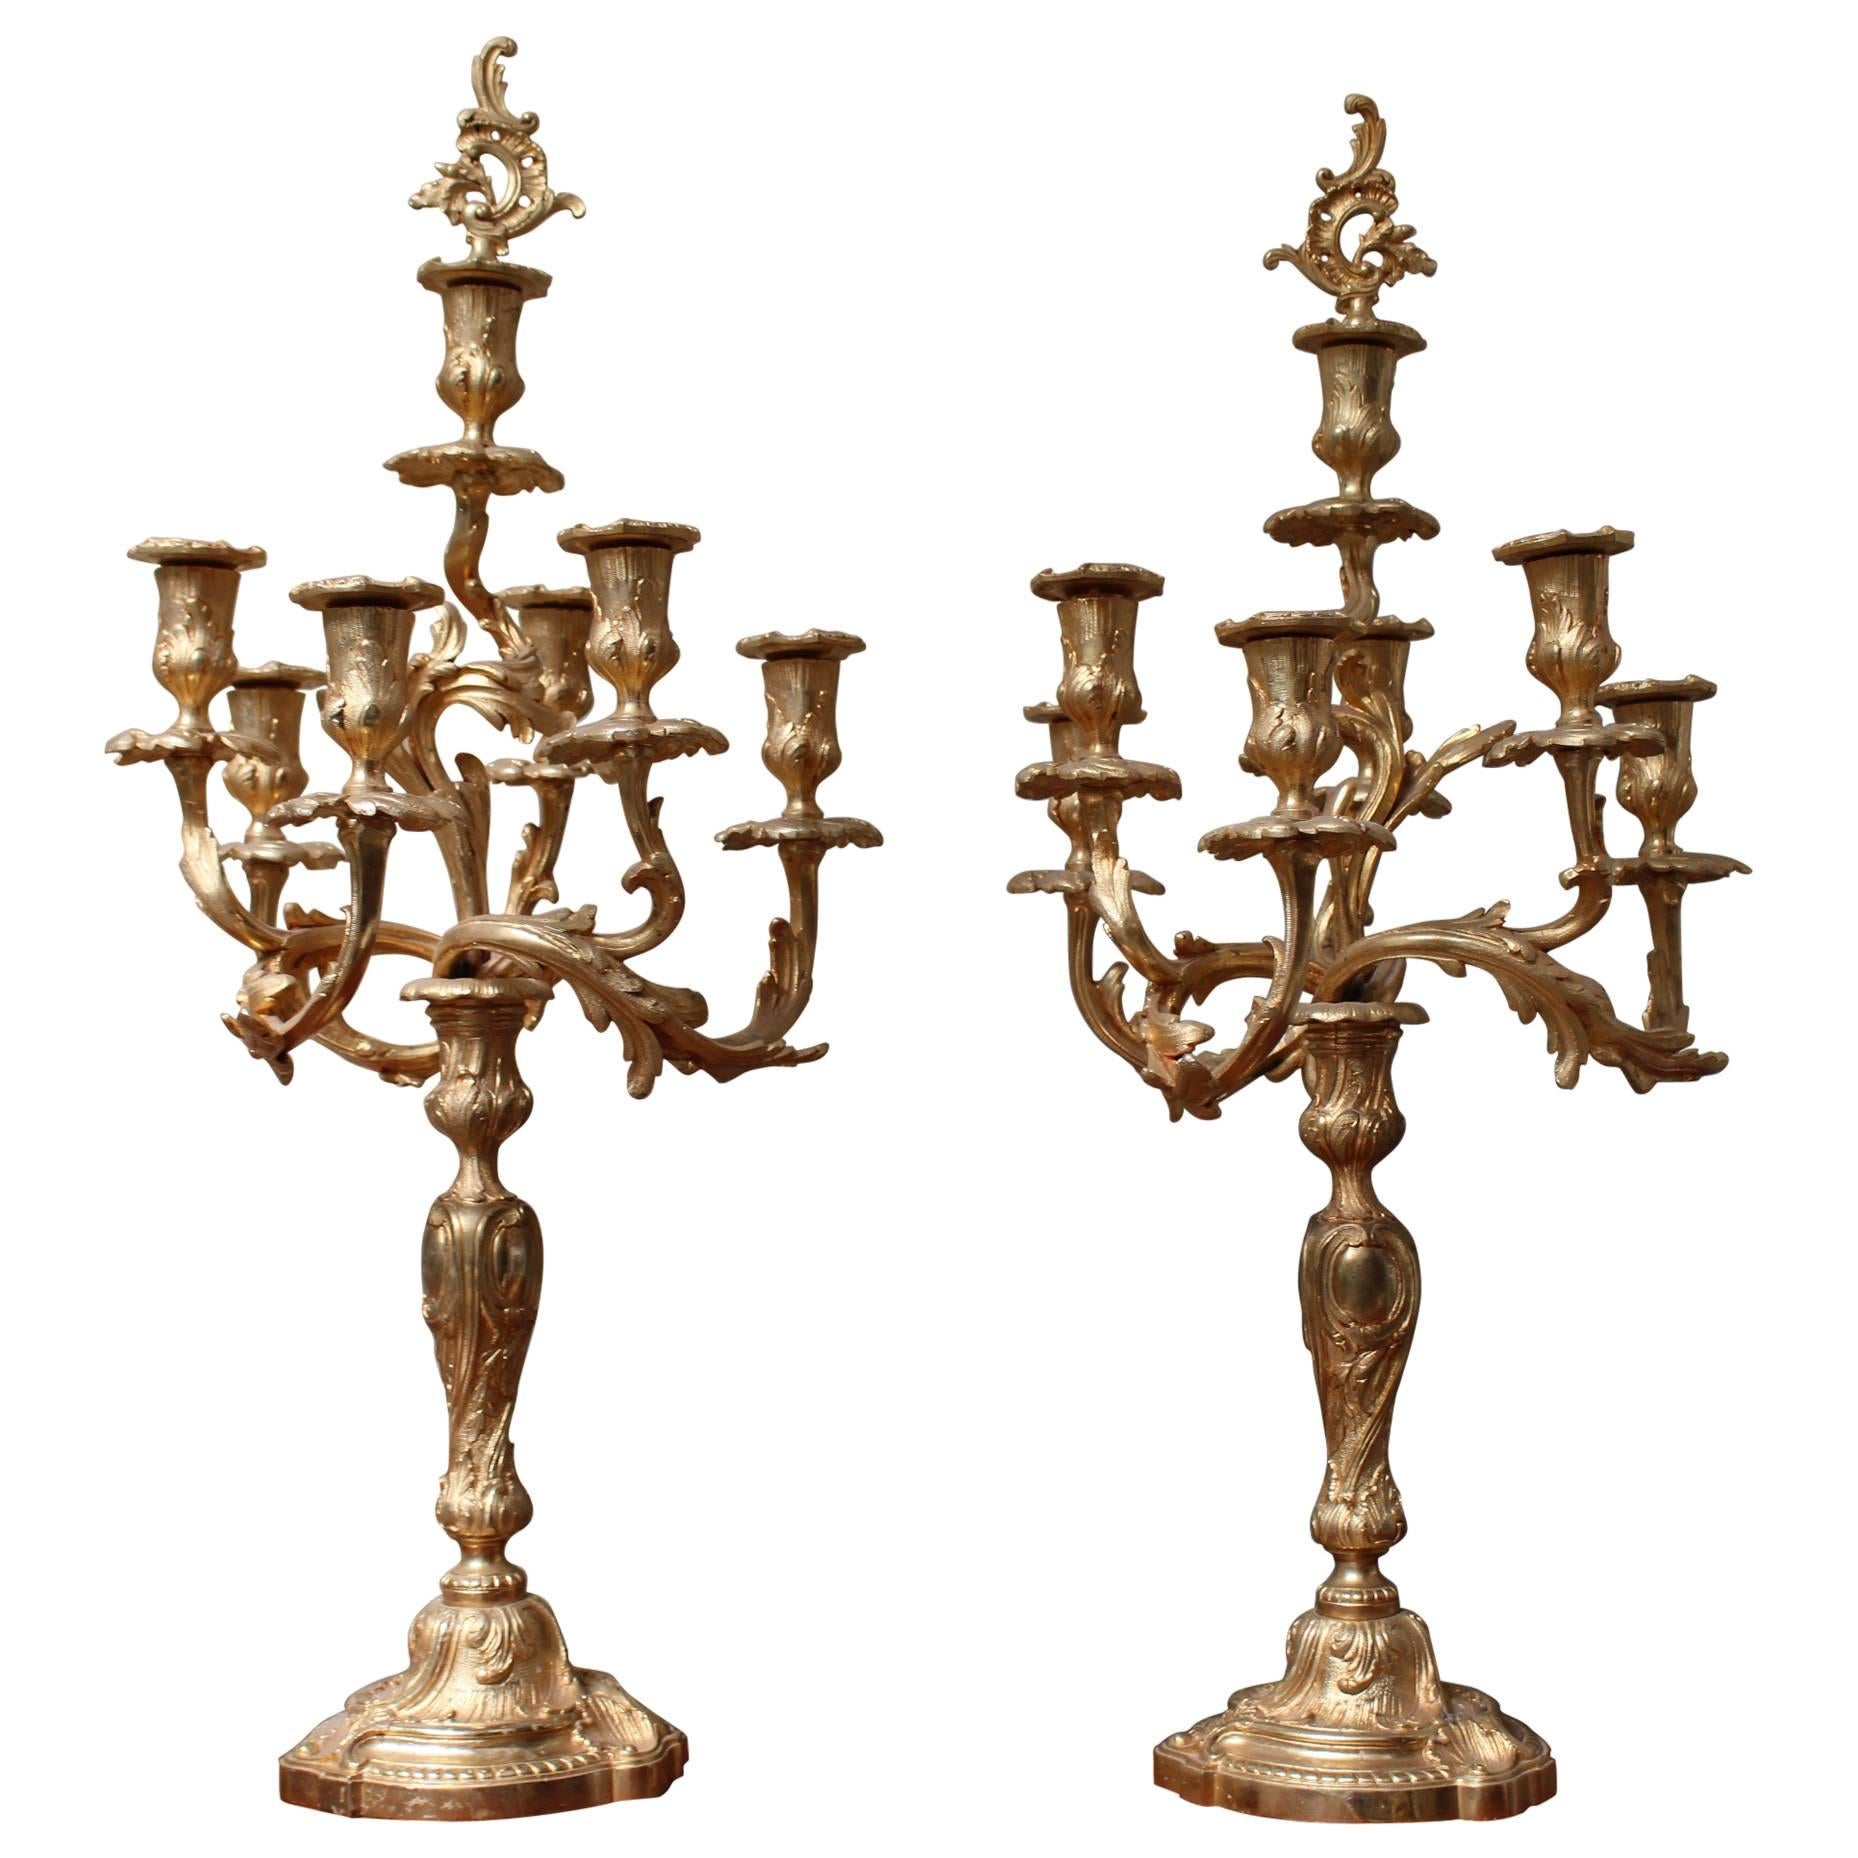 Pair of French Louis XV Style Bronze Doré Candelabra